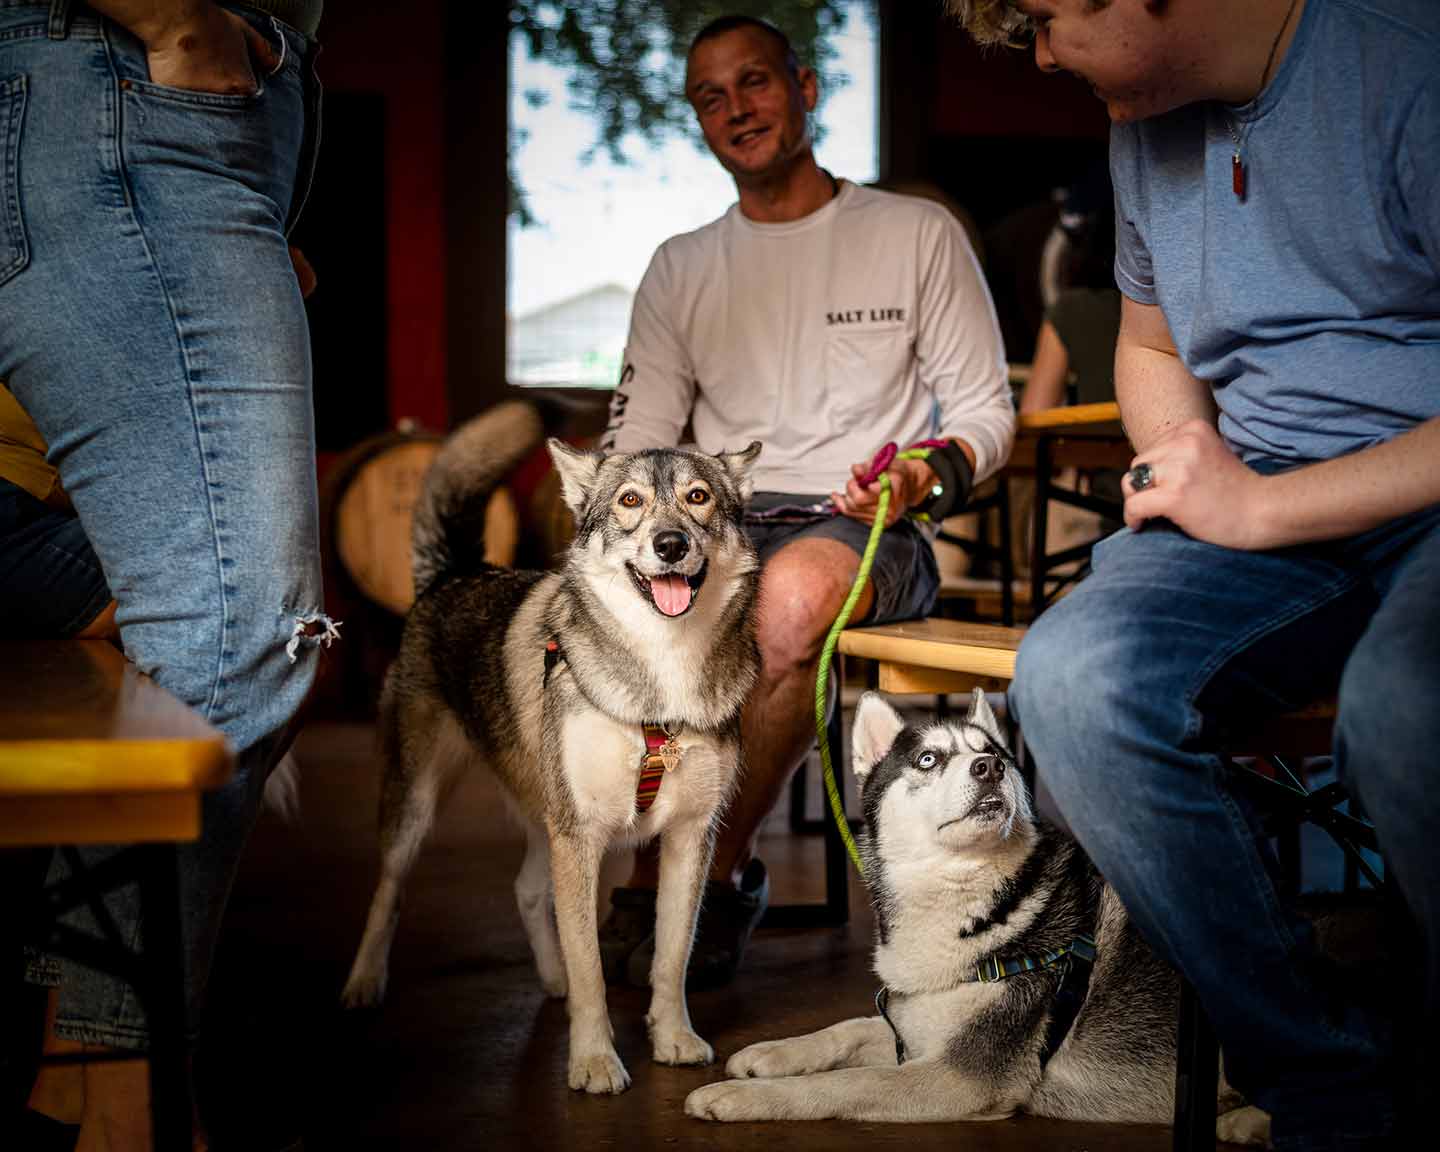 Men sitting inside Pinellas Ale Works with dogs